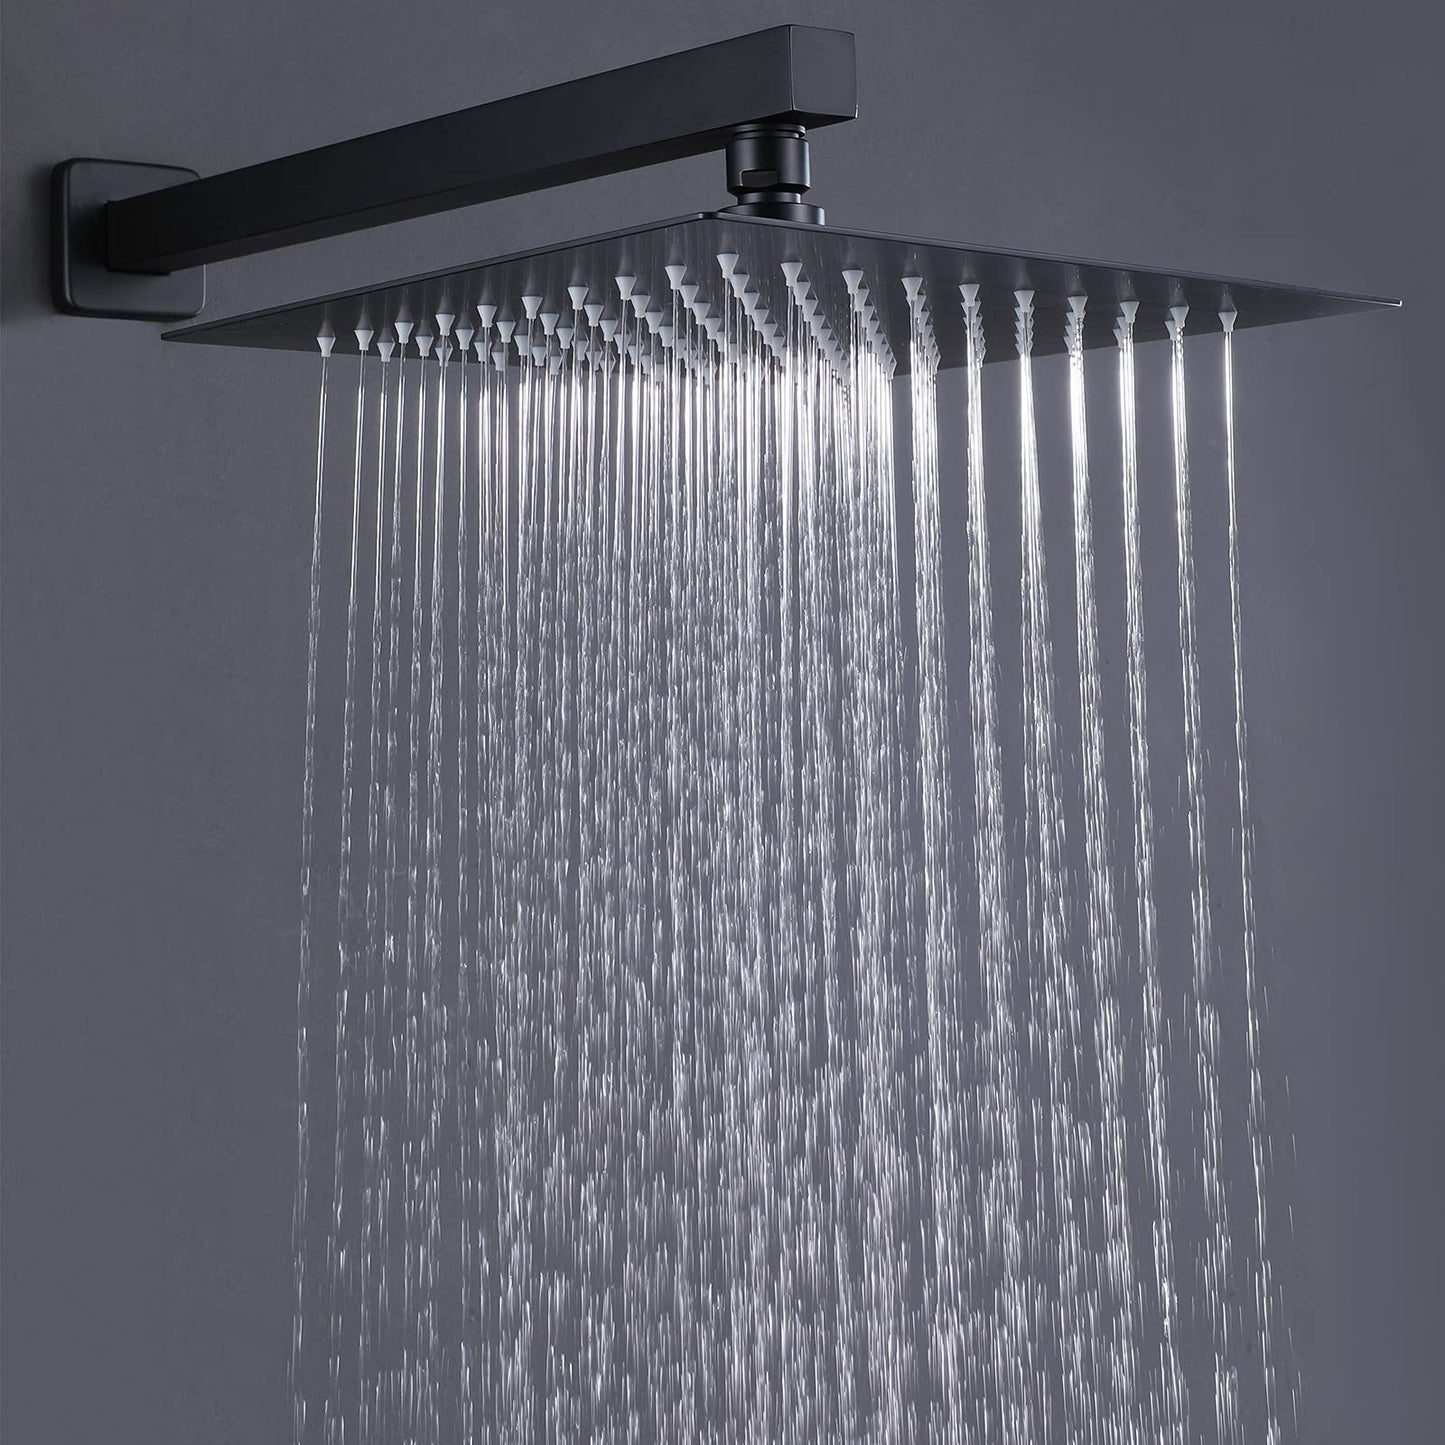 RBROHANT Black Shower Head and Handle Set, Matte Black Rain Shower Head with Valve Set, 10 Inch Overhead Shower Head Sets for Bathroom with Rough-in Valve, Wall Mounted, RB0785 - Like New